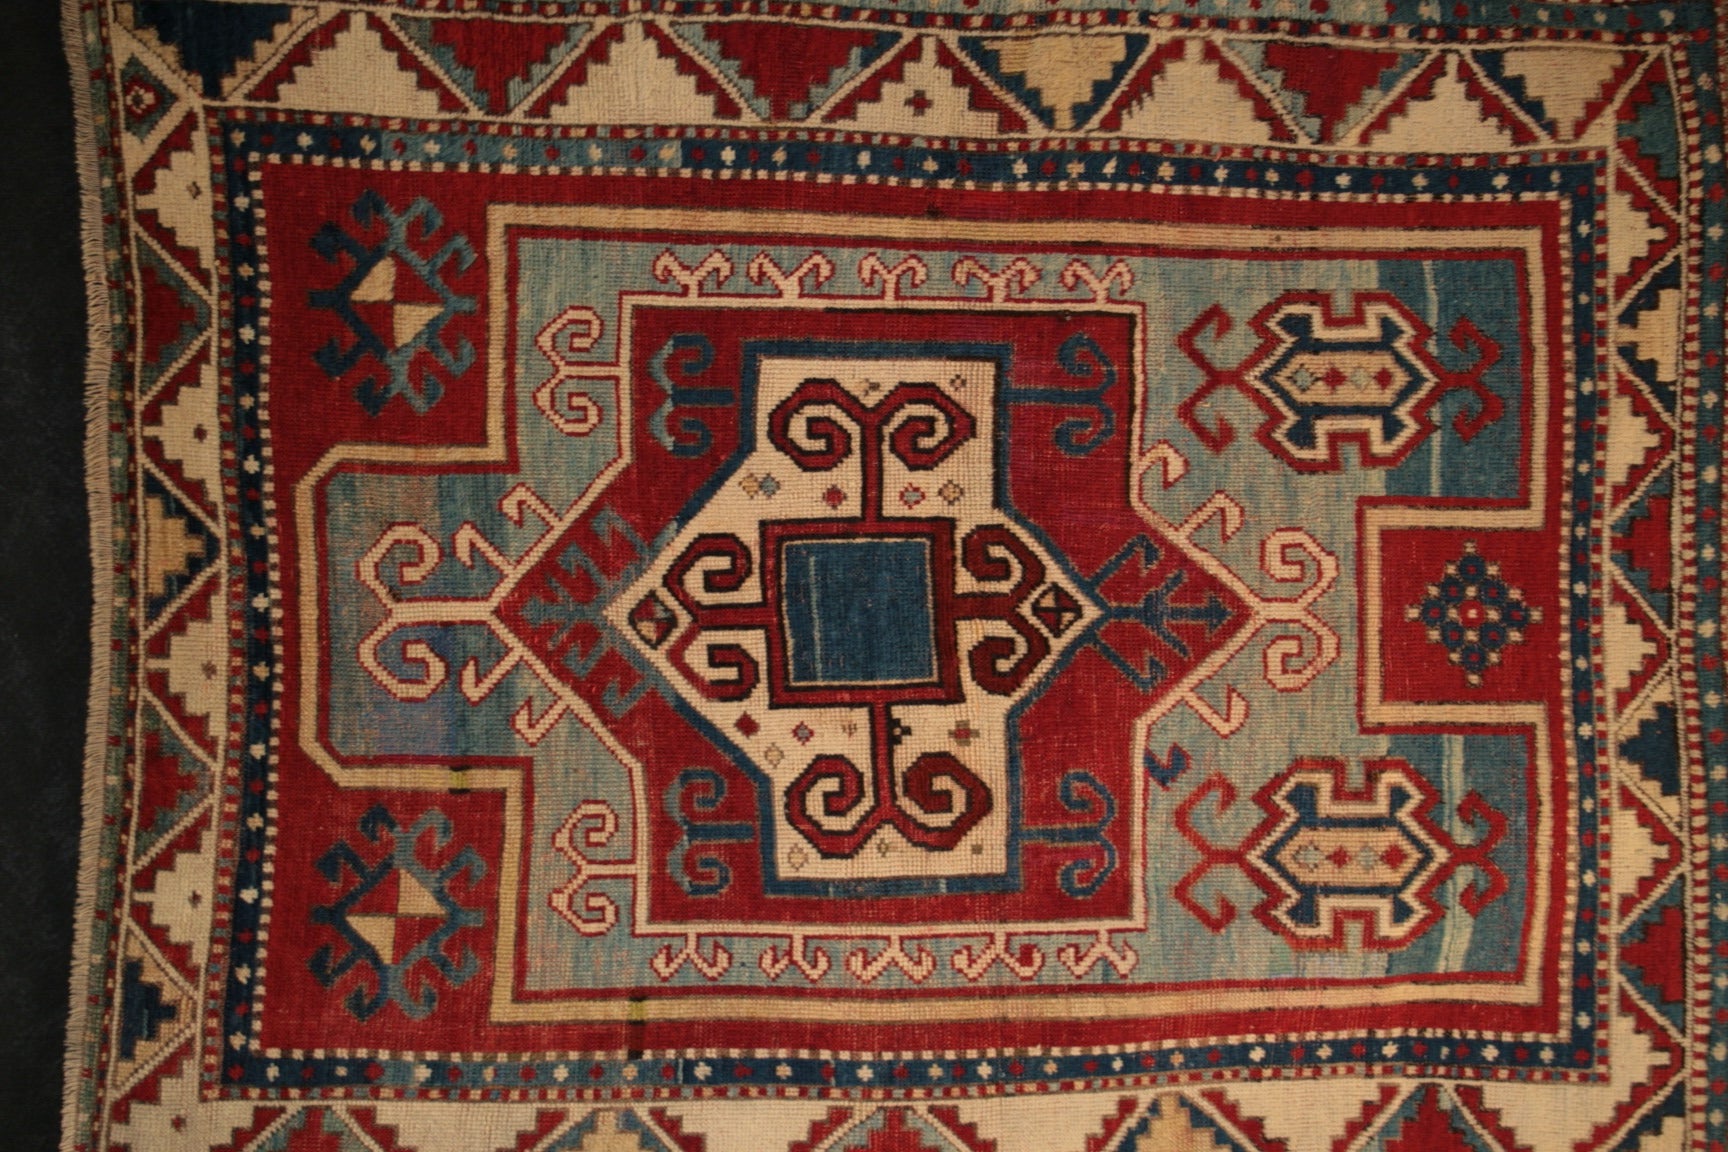 This rug was woven circa 1890-1900 in the Kazak district of Western Armenia.  The design is a distinctive prayer shaped motif, specifically attributed to the Fachralo Kazak carpets.  The medallion in the middle of the field is a classic design